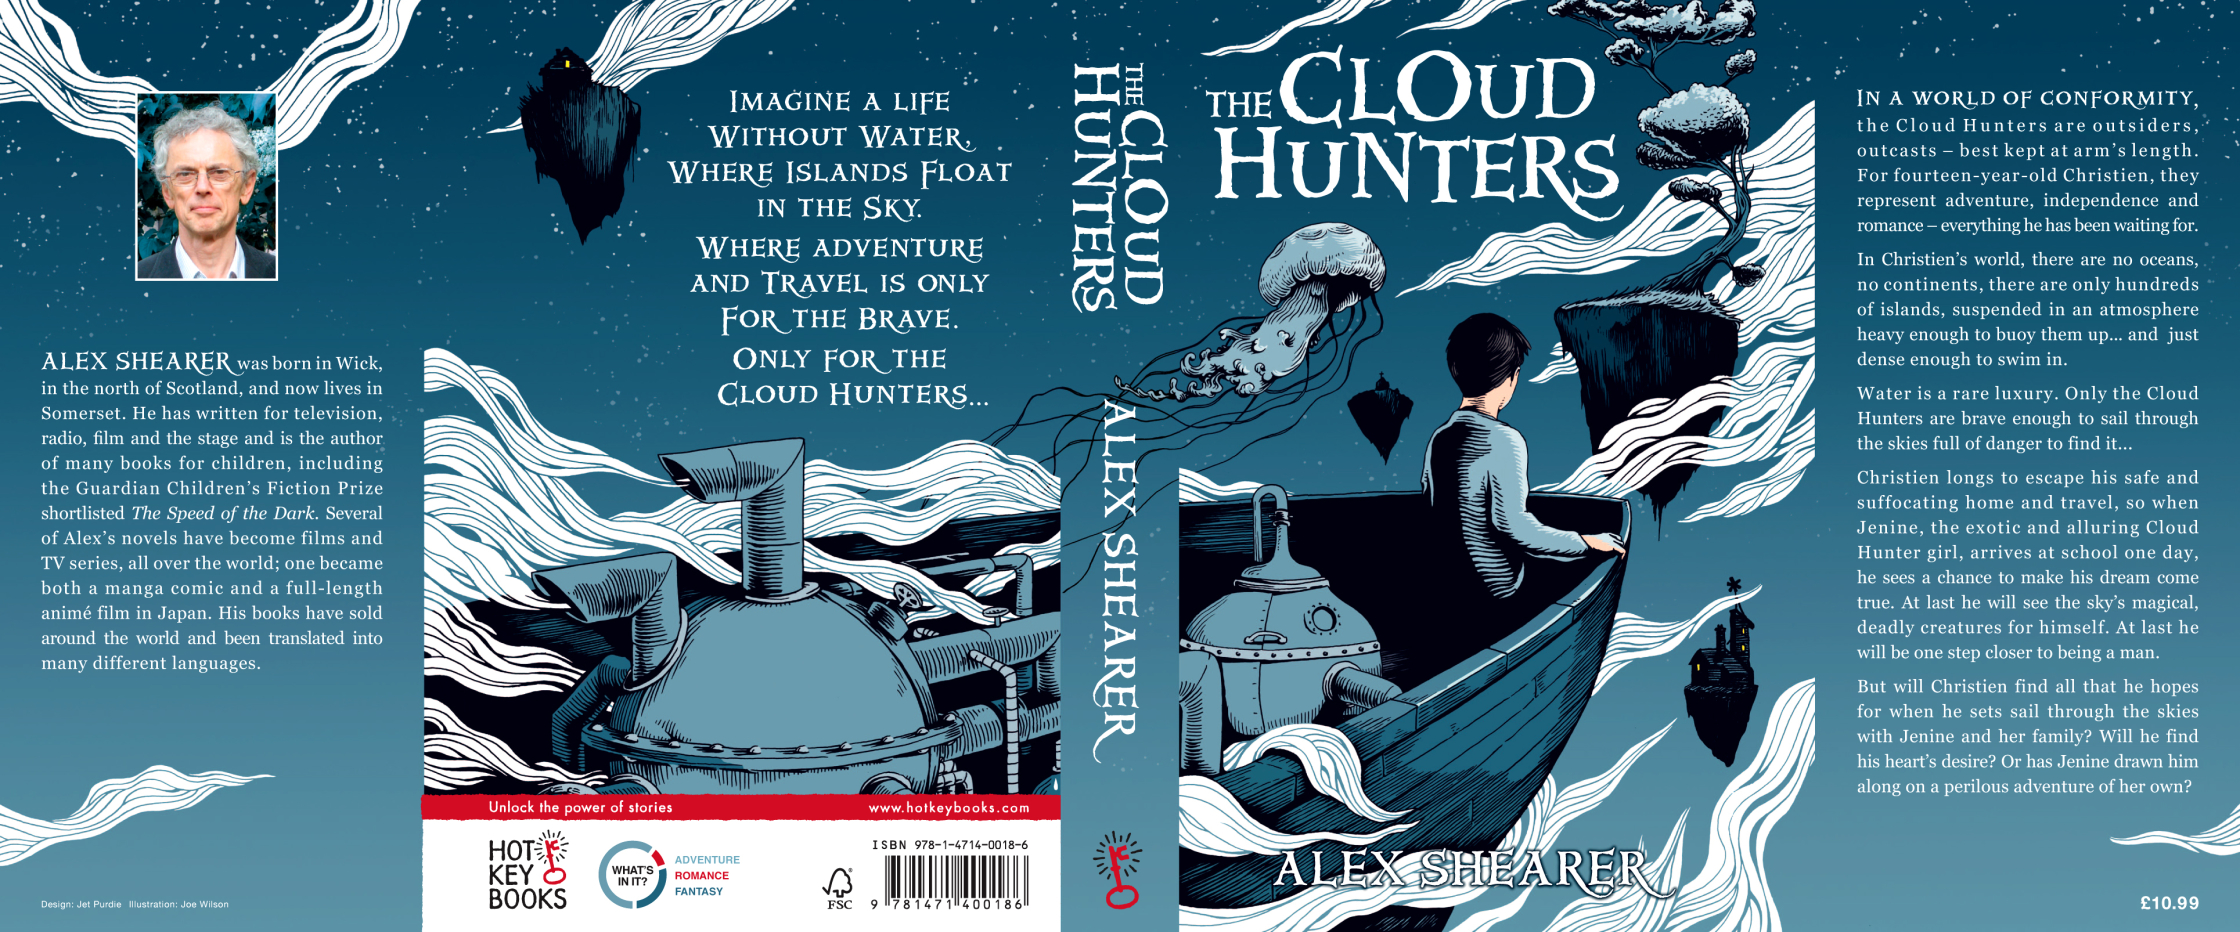 The Cloud Hunters Book Cover